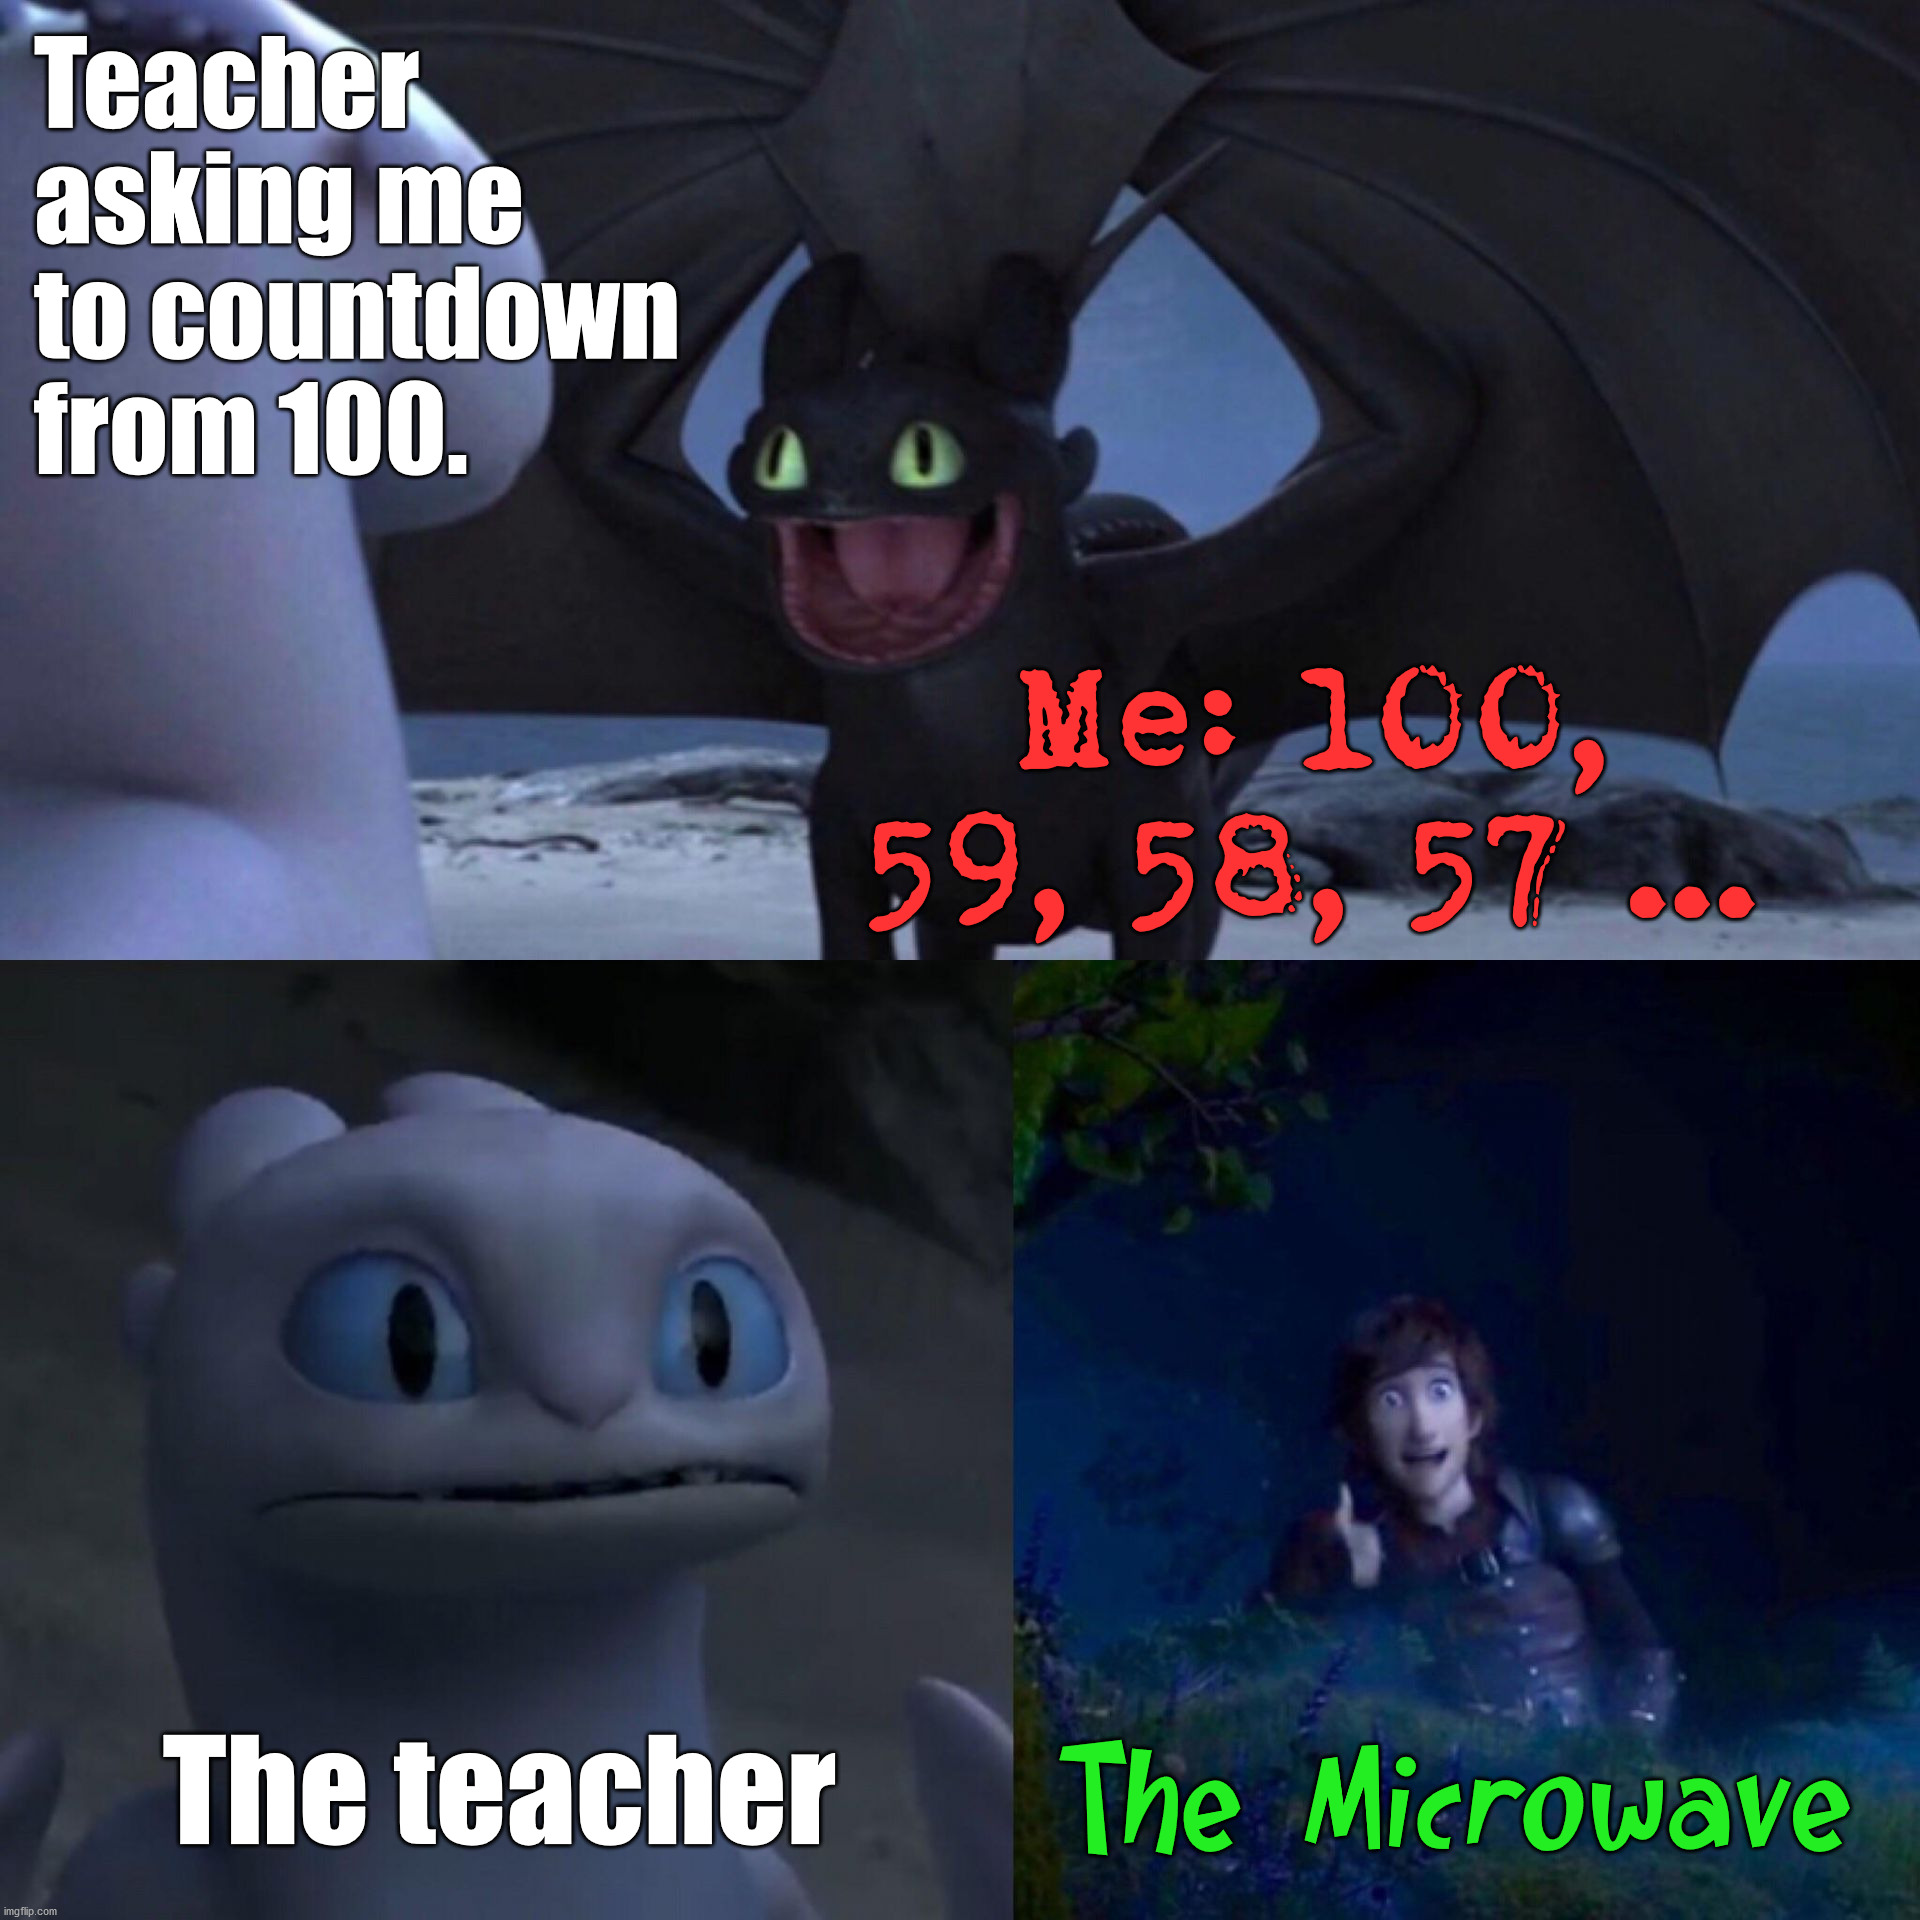 The final countdown | Teacher asking me to countdown from 100. Me: 100, 59, 58, 57 ... The teacher; The Microwave | image tagged in night fury,countdown | made w/ Imgflip meme maker